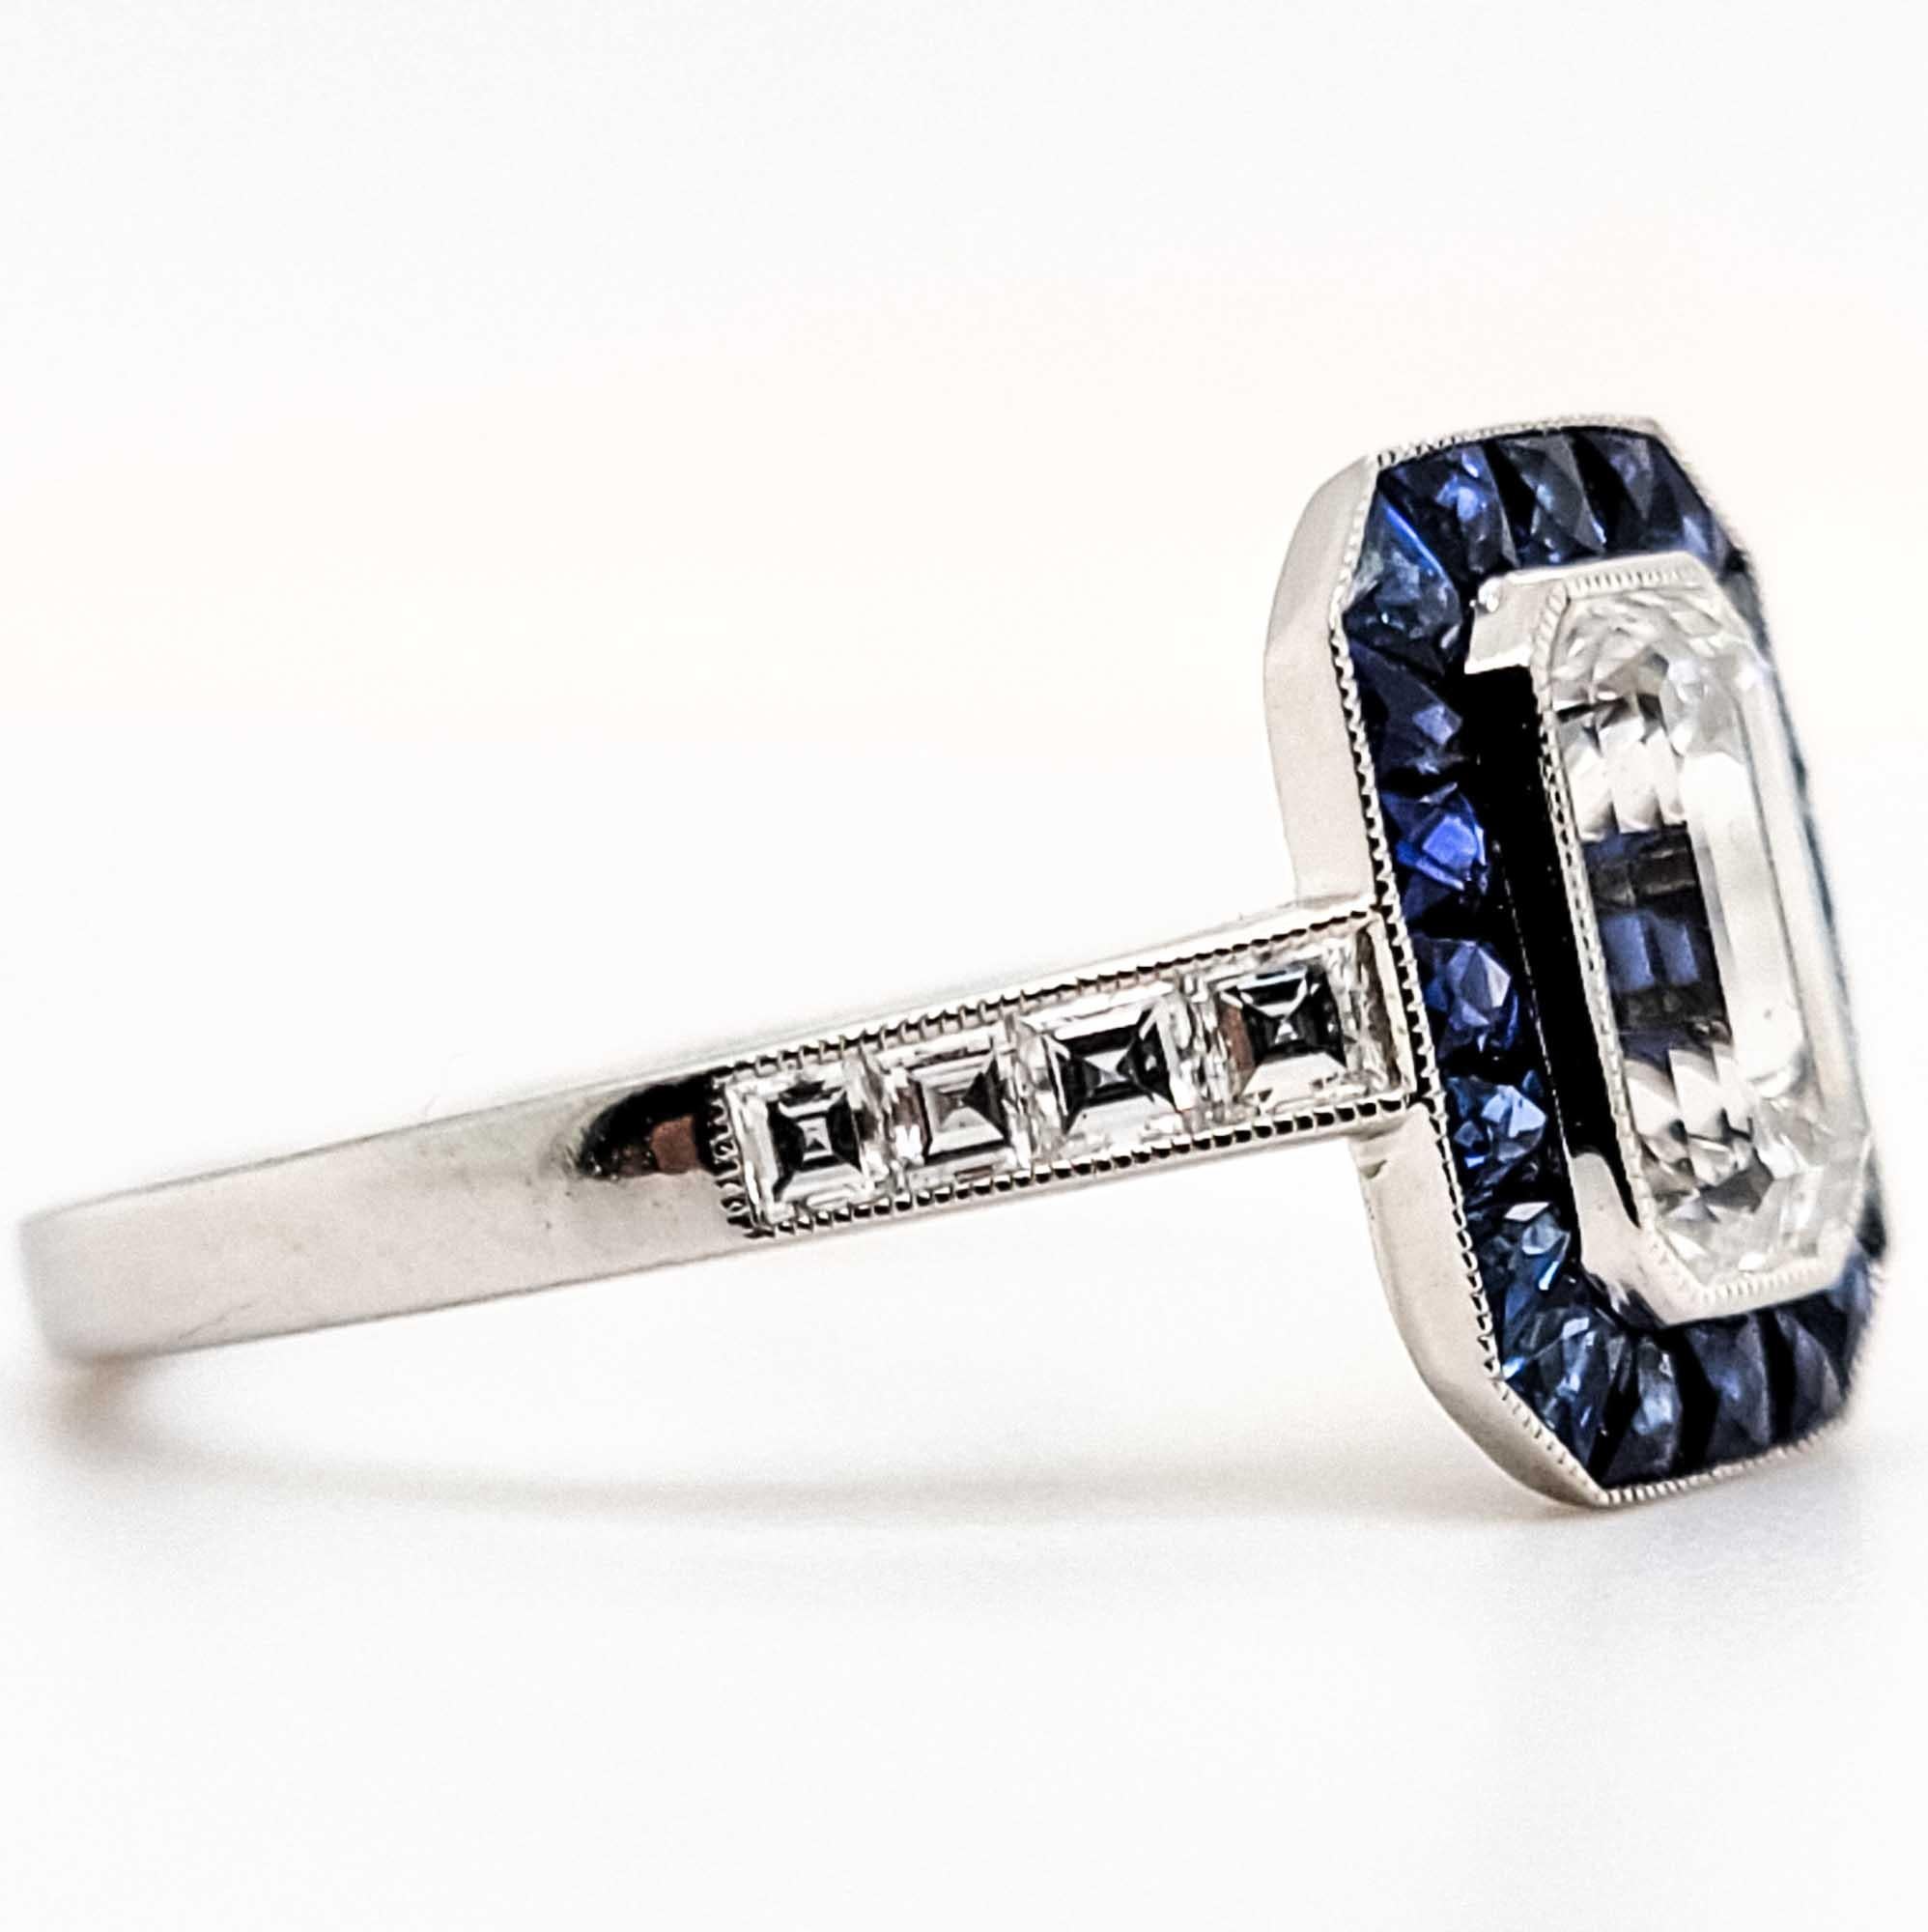 This elegant GIA certified platinum ring is with 1.03 carat emerald cut center diamond with a color and clarity of D-VVS2 accentuated with blue sapphire weighing 0.70 carats and diamonds weighing 0.24 carats ring.

The ring is available for